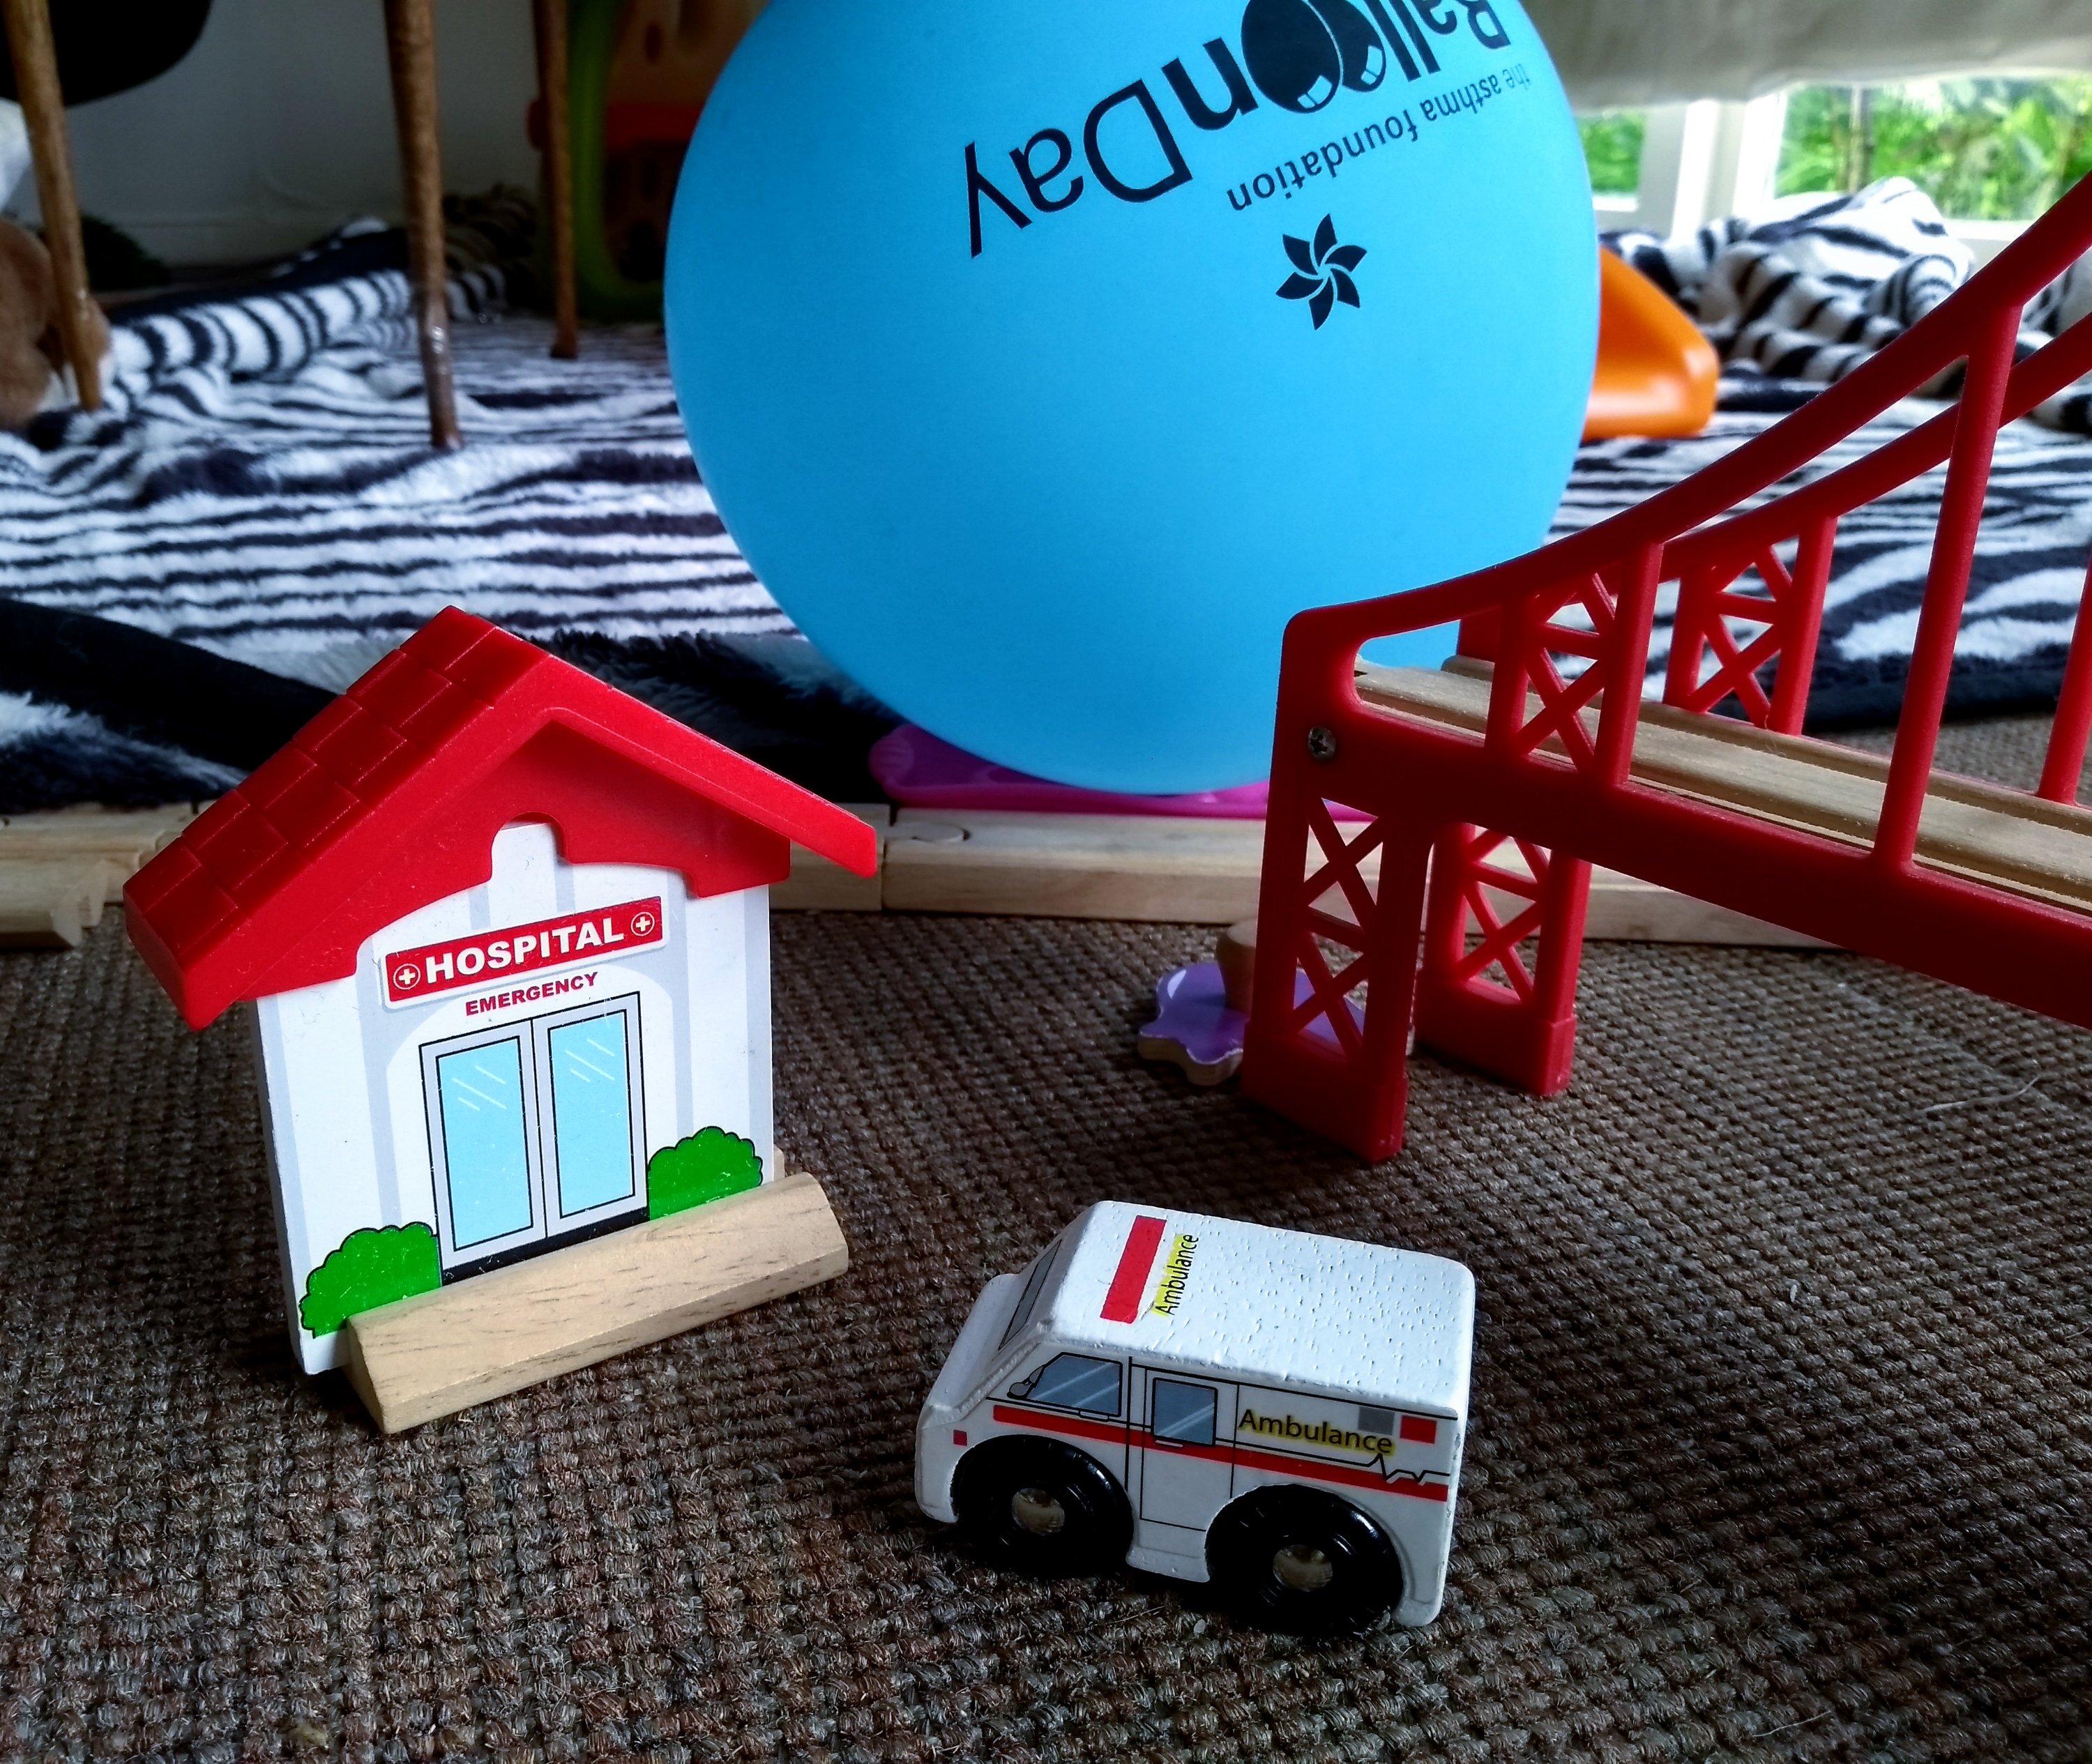 Toy hospital and ambulance on carpeted floor with balloon